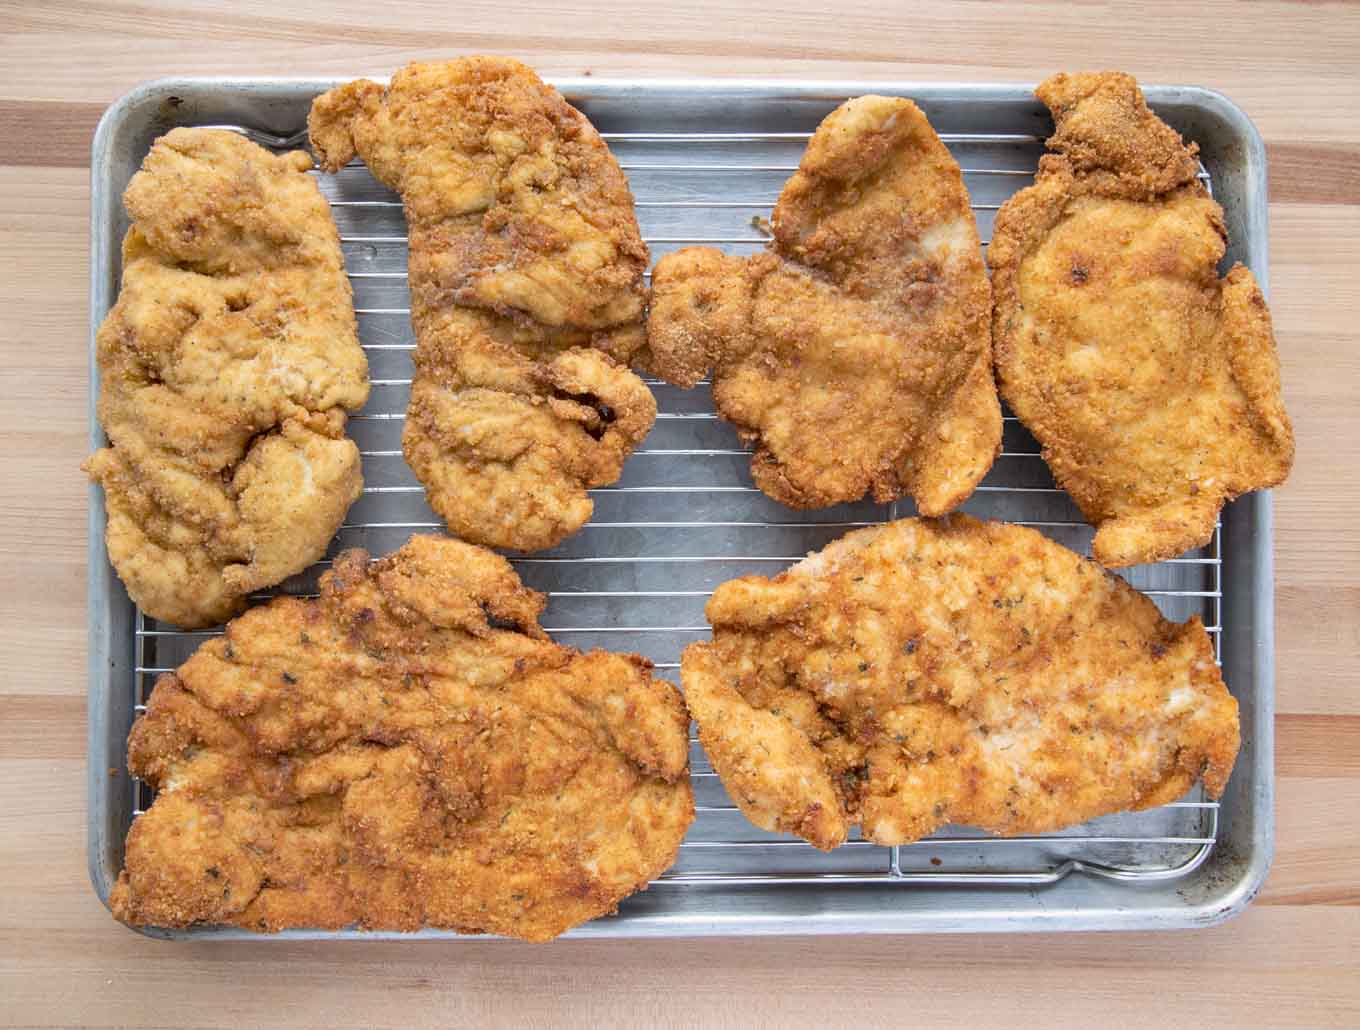 fried chicken cutlets on a draining screen.